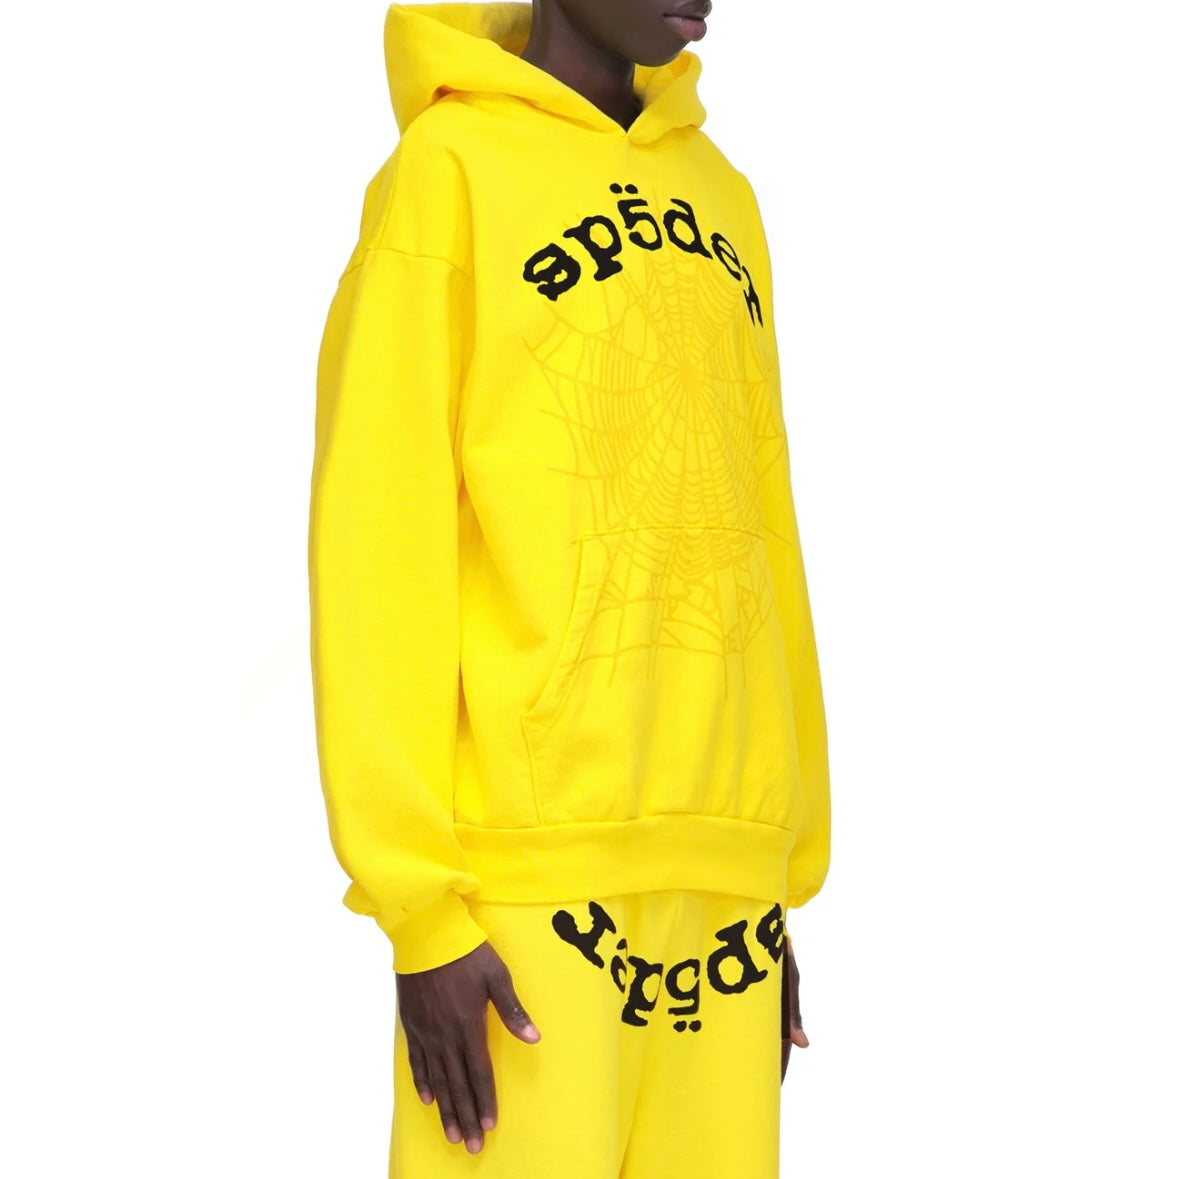 Sp5der Yellow Black Legacy Hoodie On Body Front Right Male